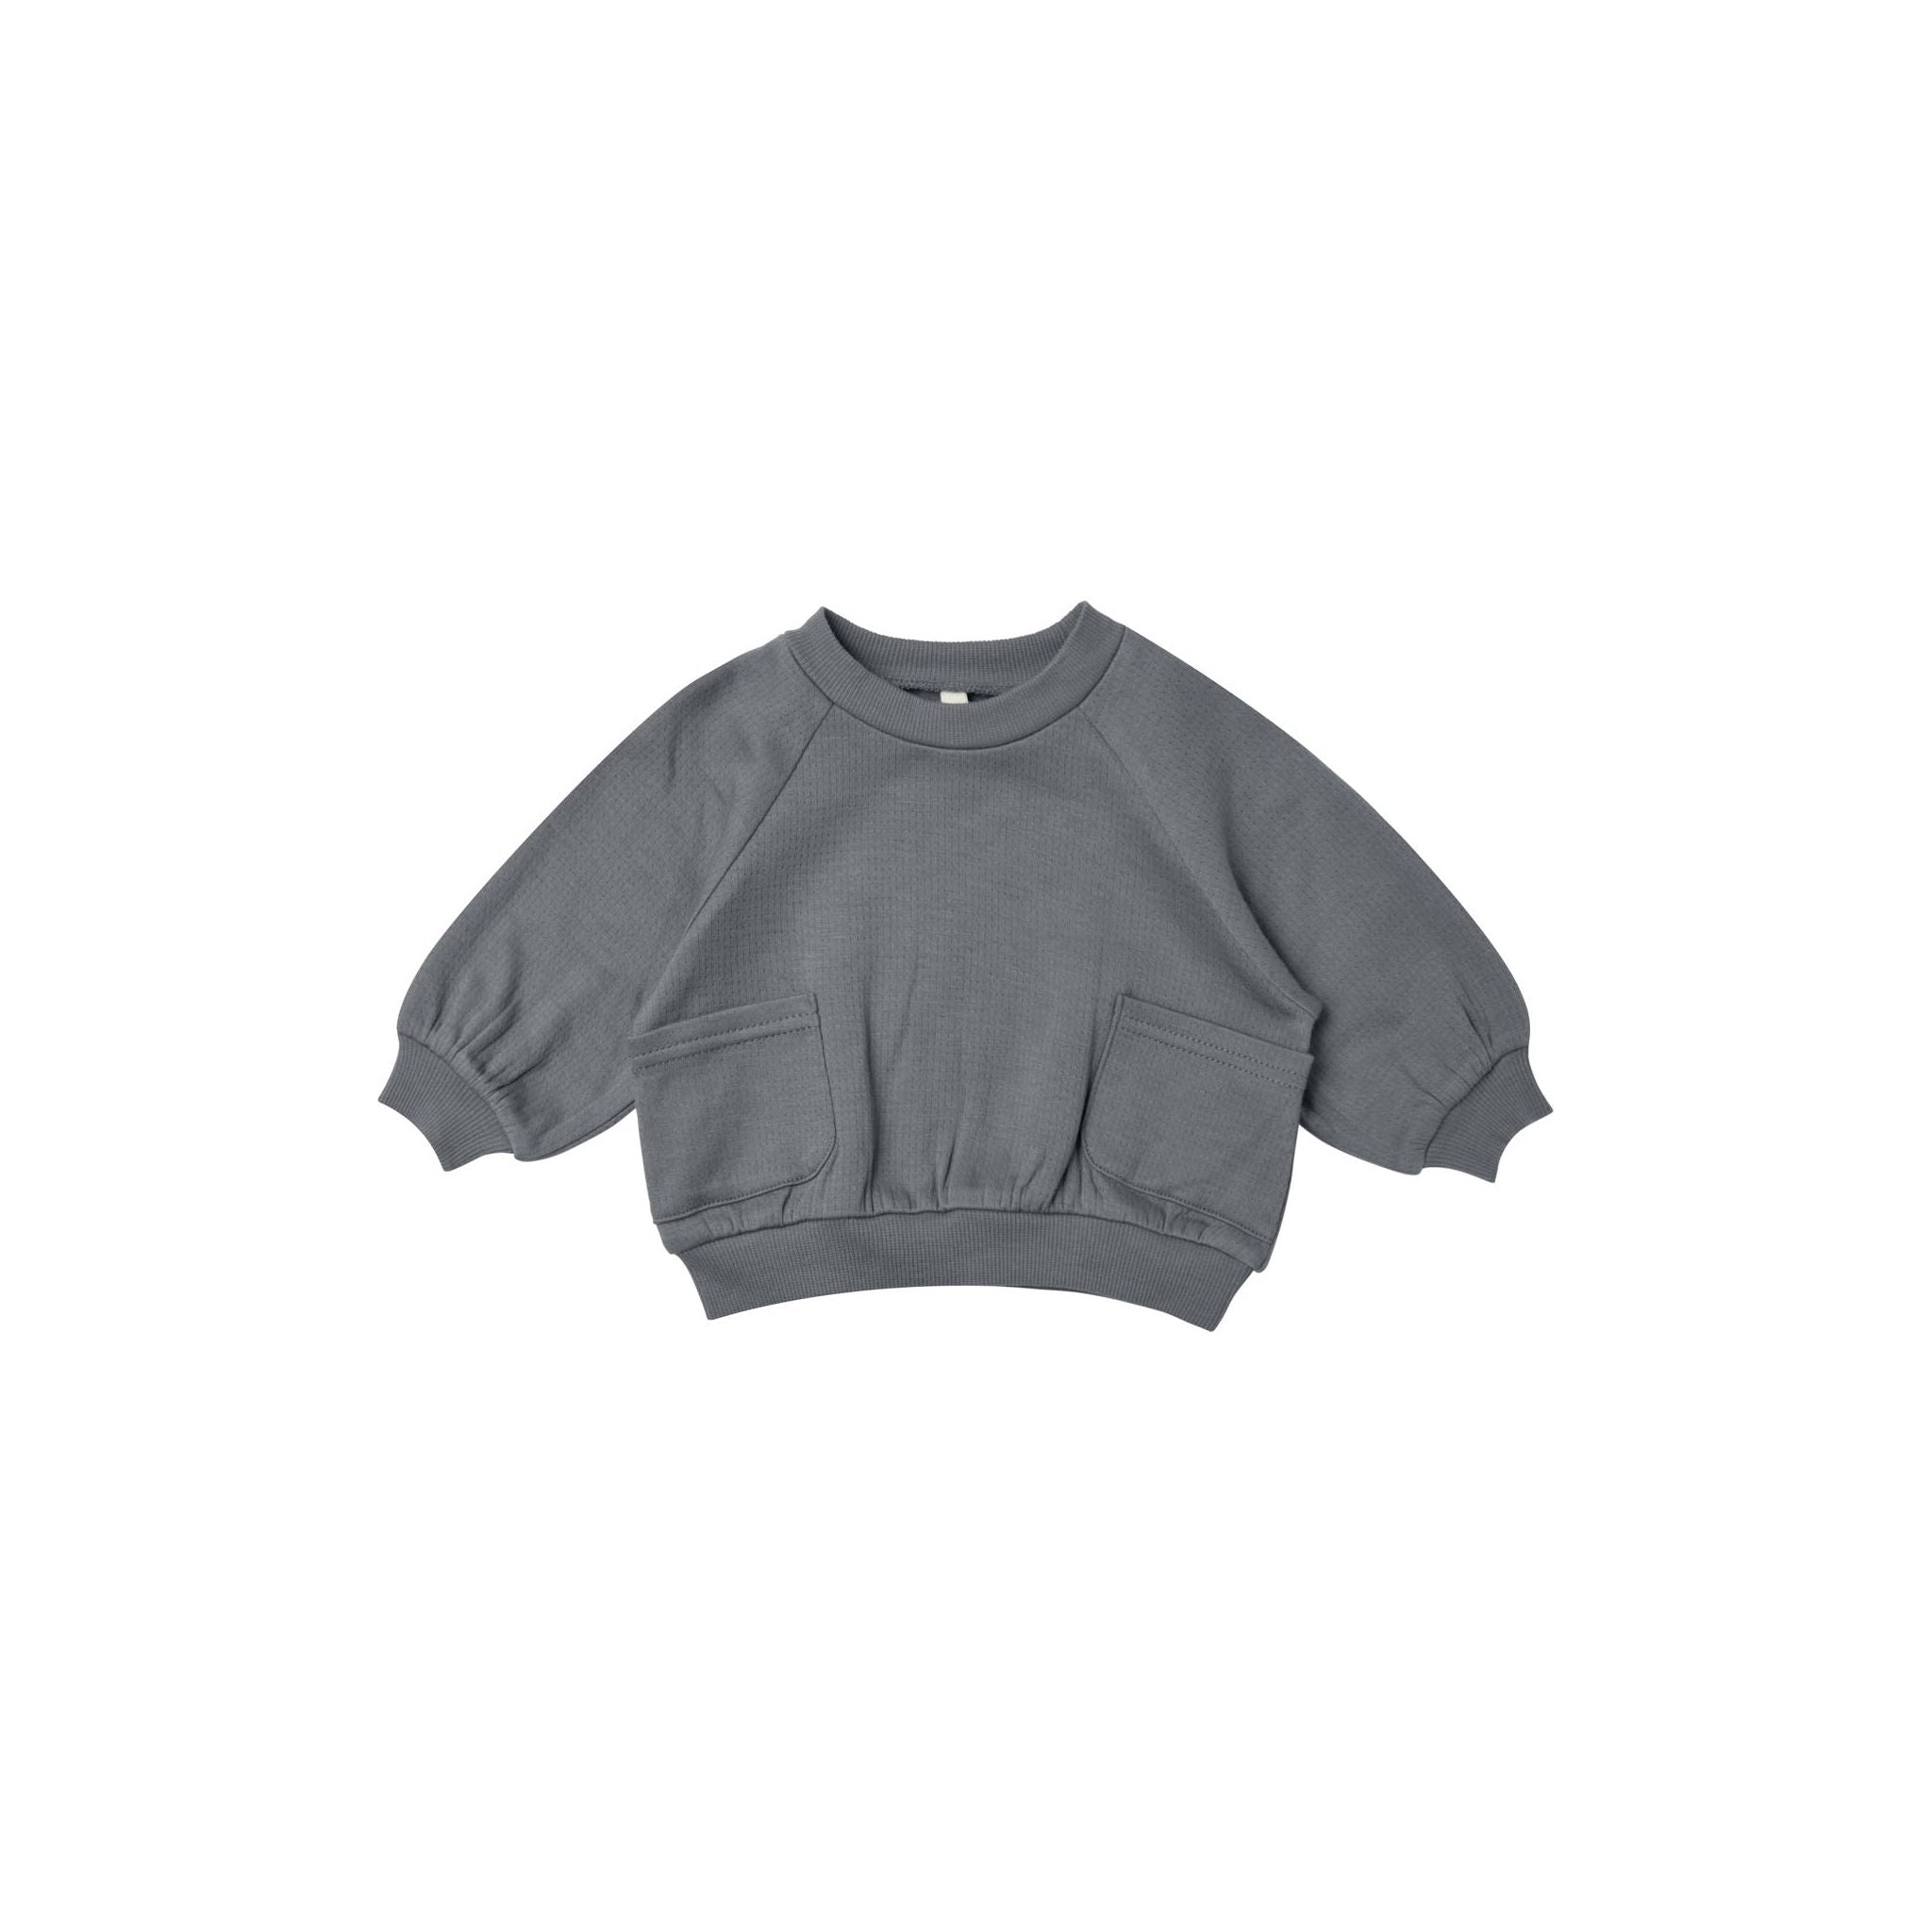 Quincy Mae navy sweatshirt with two front pockets